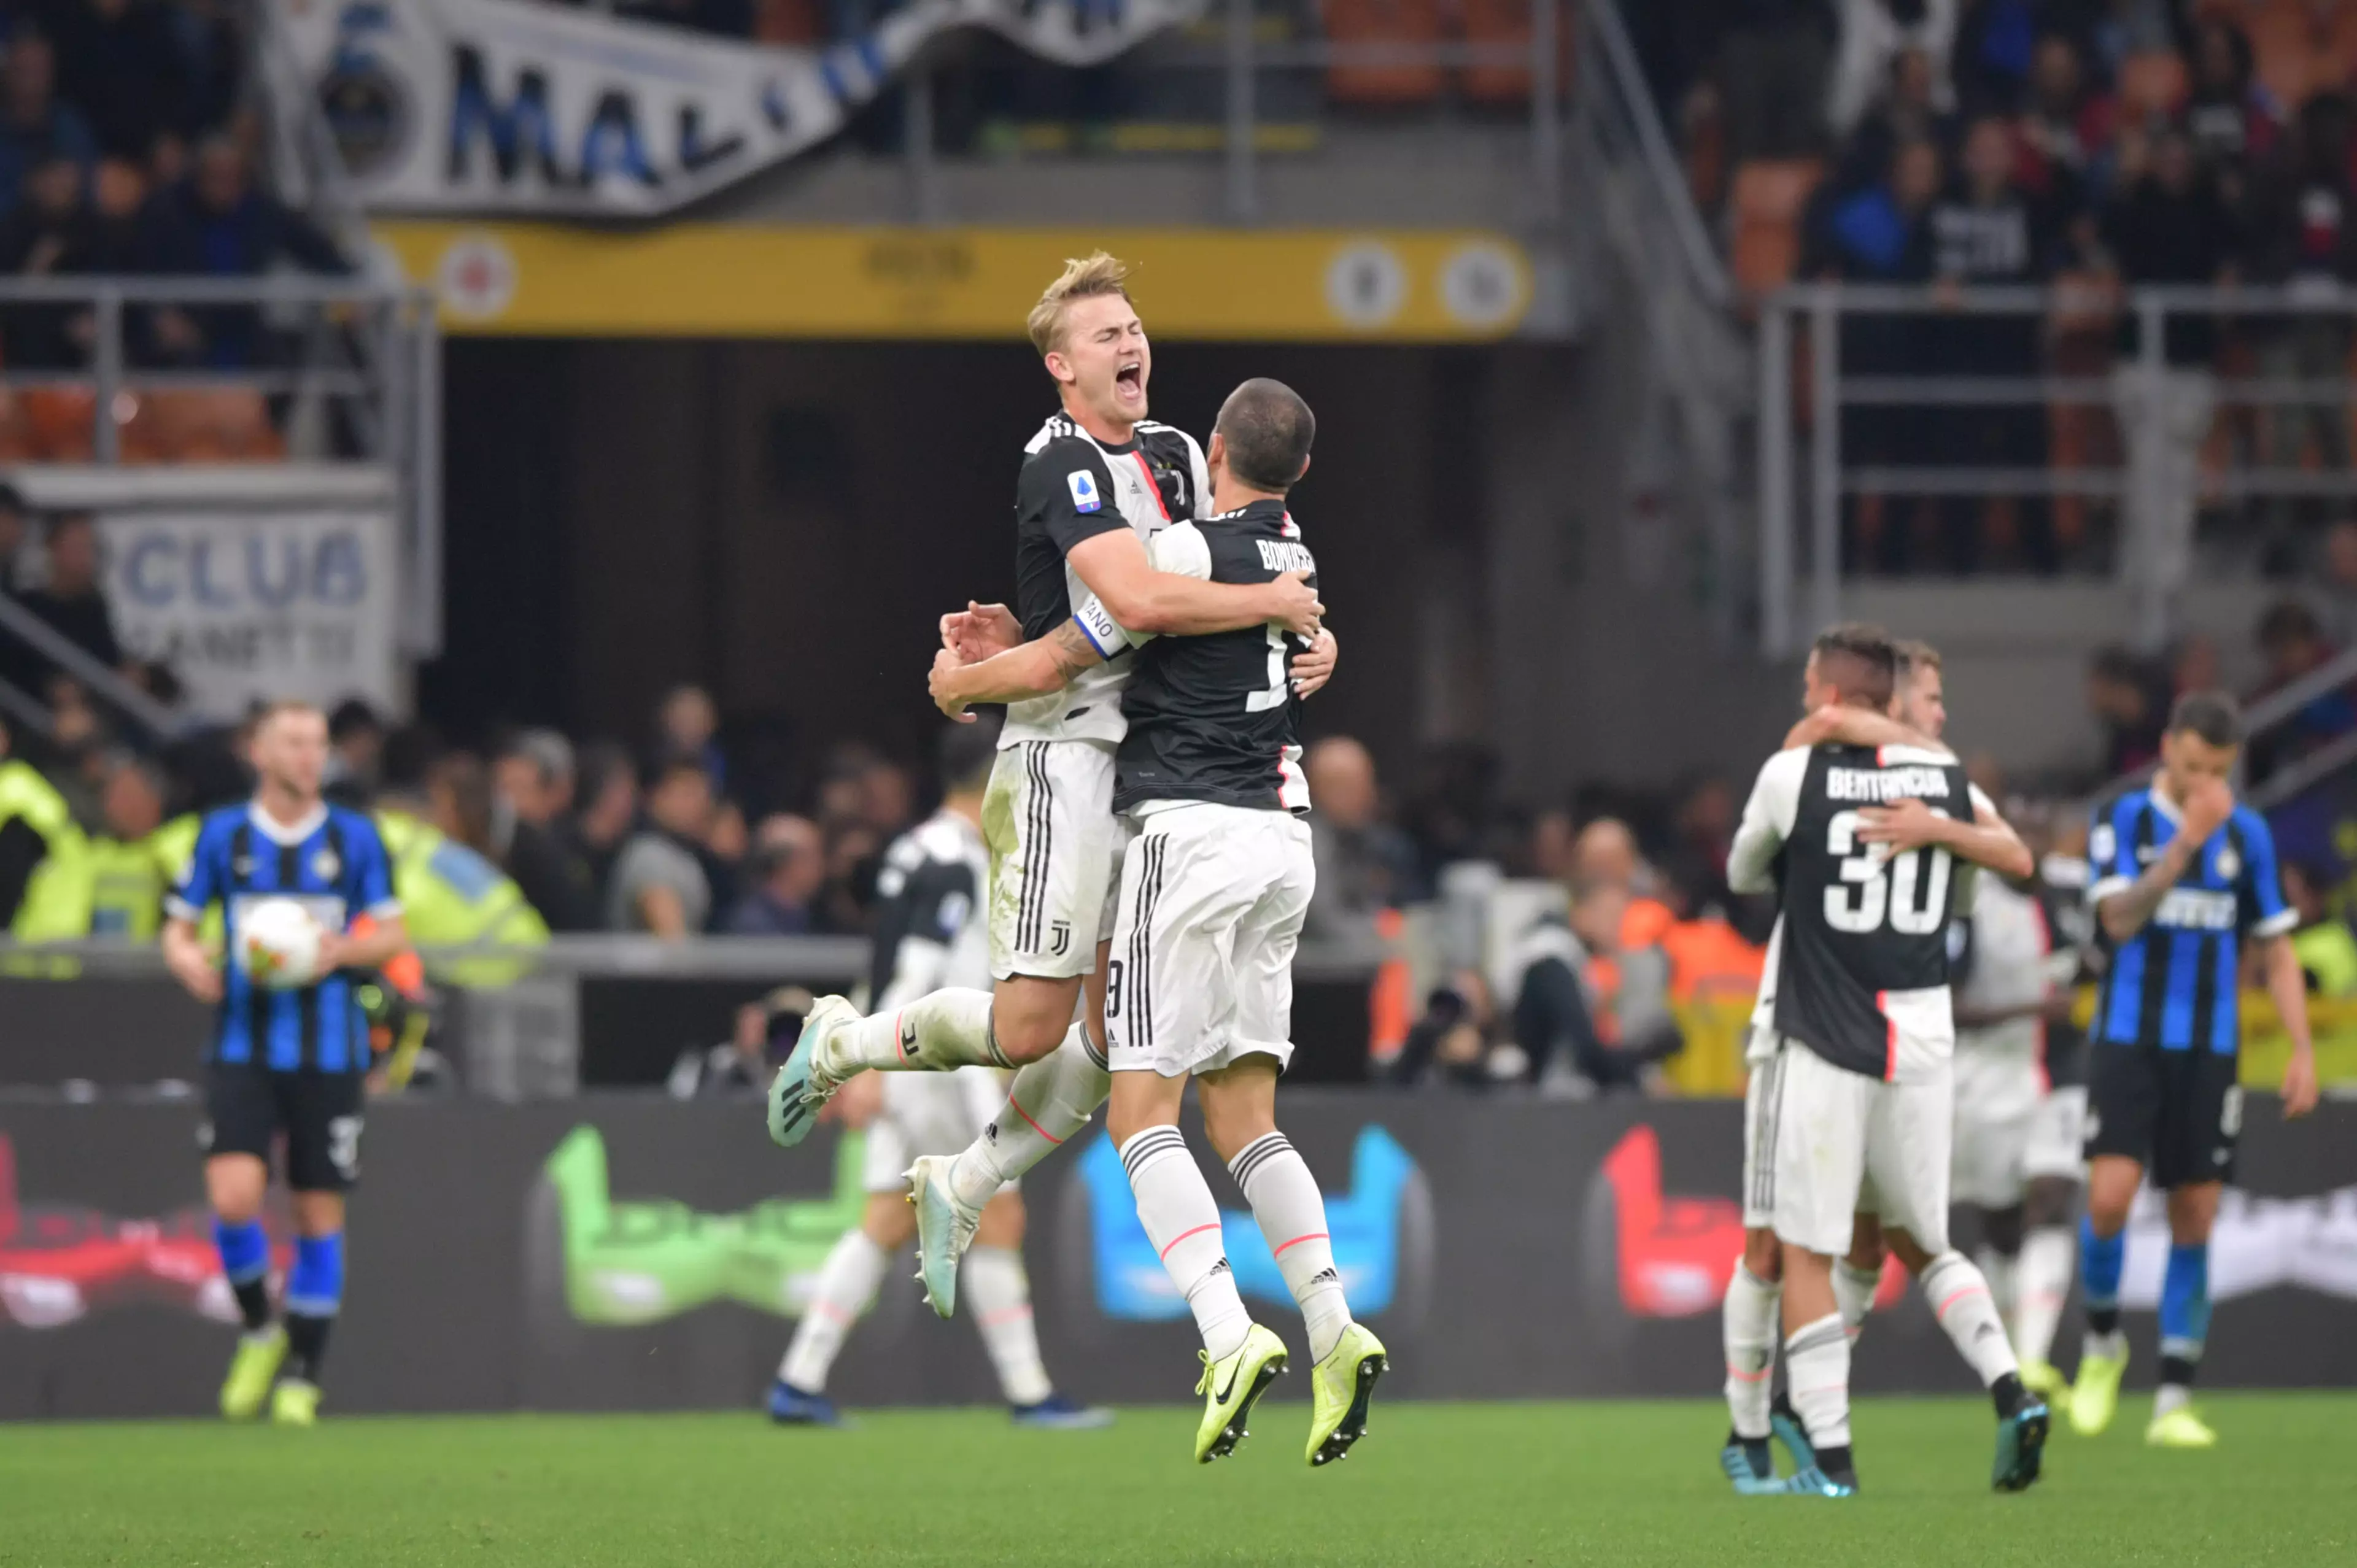 De Ligt celebrates the Derby d'Italia win over Inter, relieved for Gonzalo Higuain's winner after his earlier error. Image: PA Images